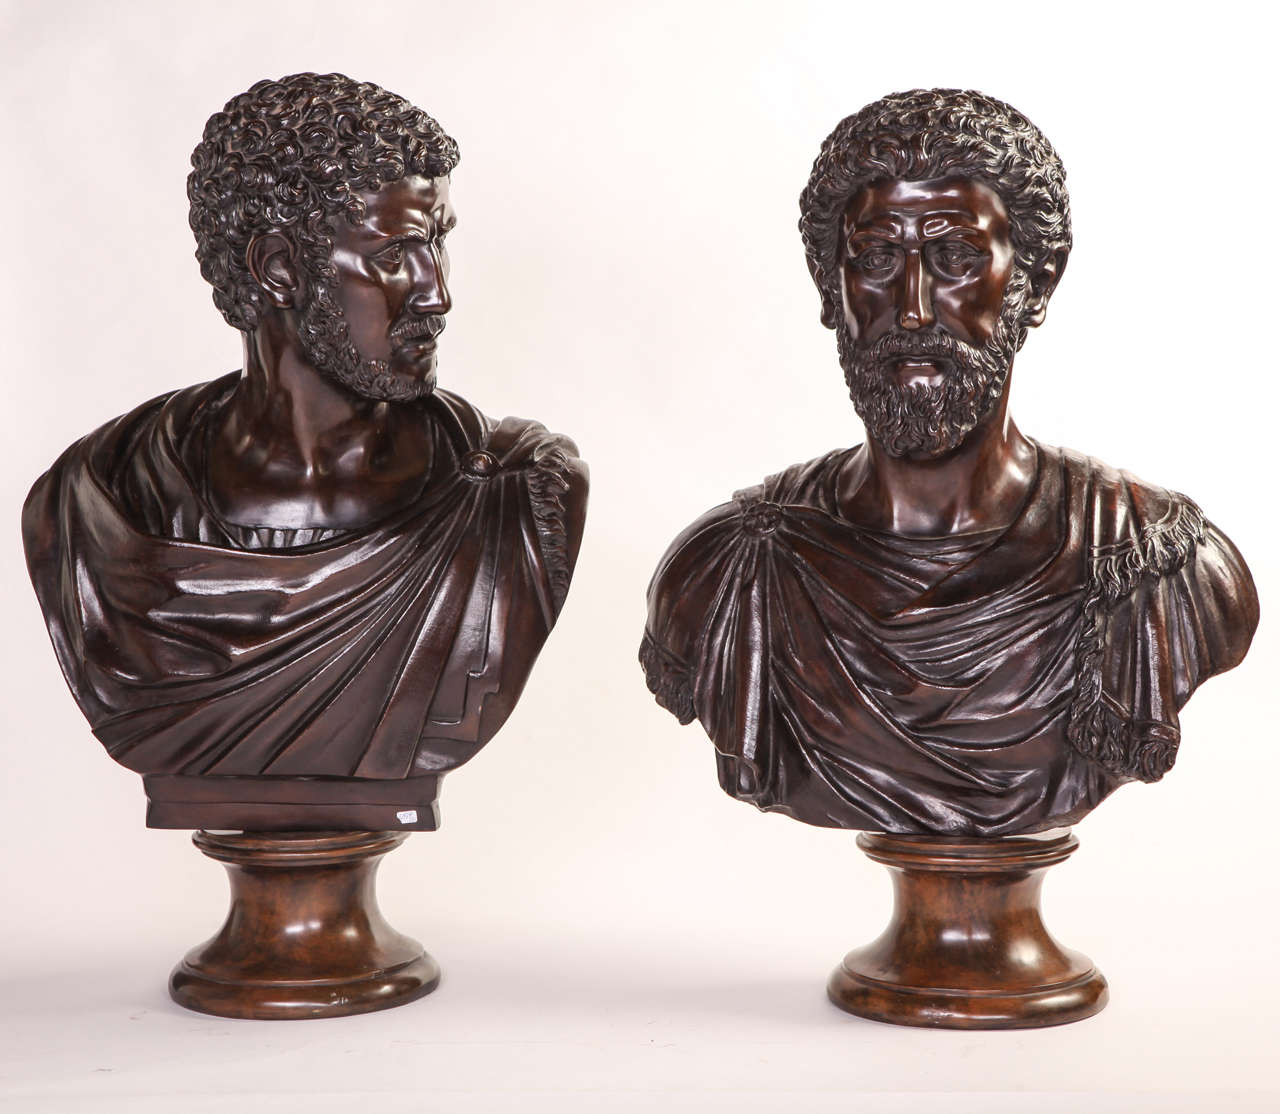 19th Century Bronze Busts of Roman Emperors, possibly Adriano and Marco Aurelio, signed C. V.